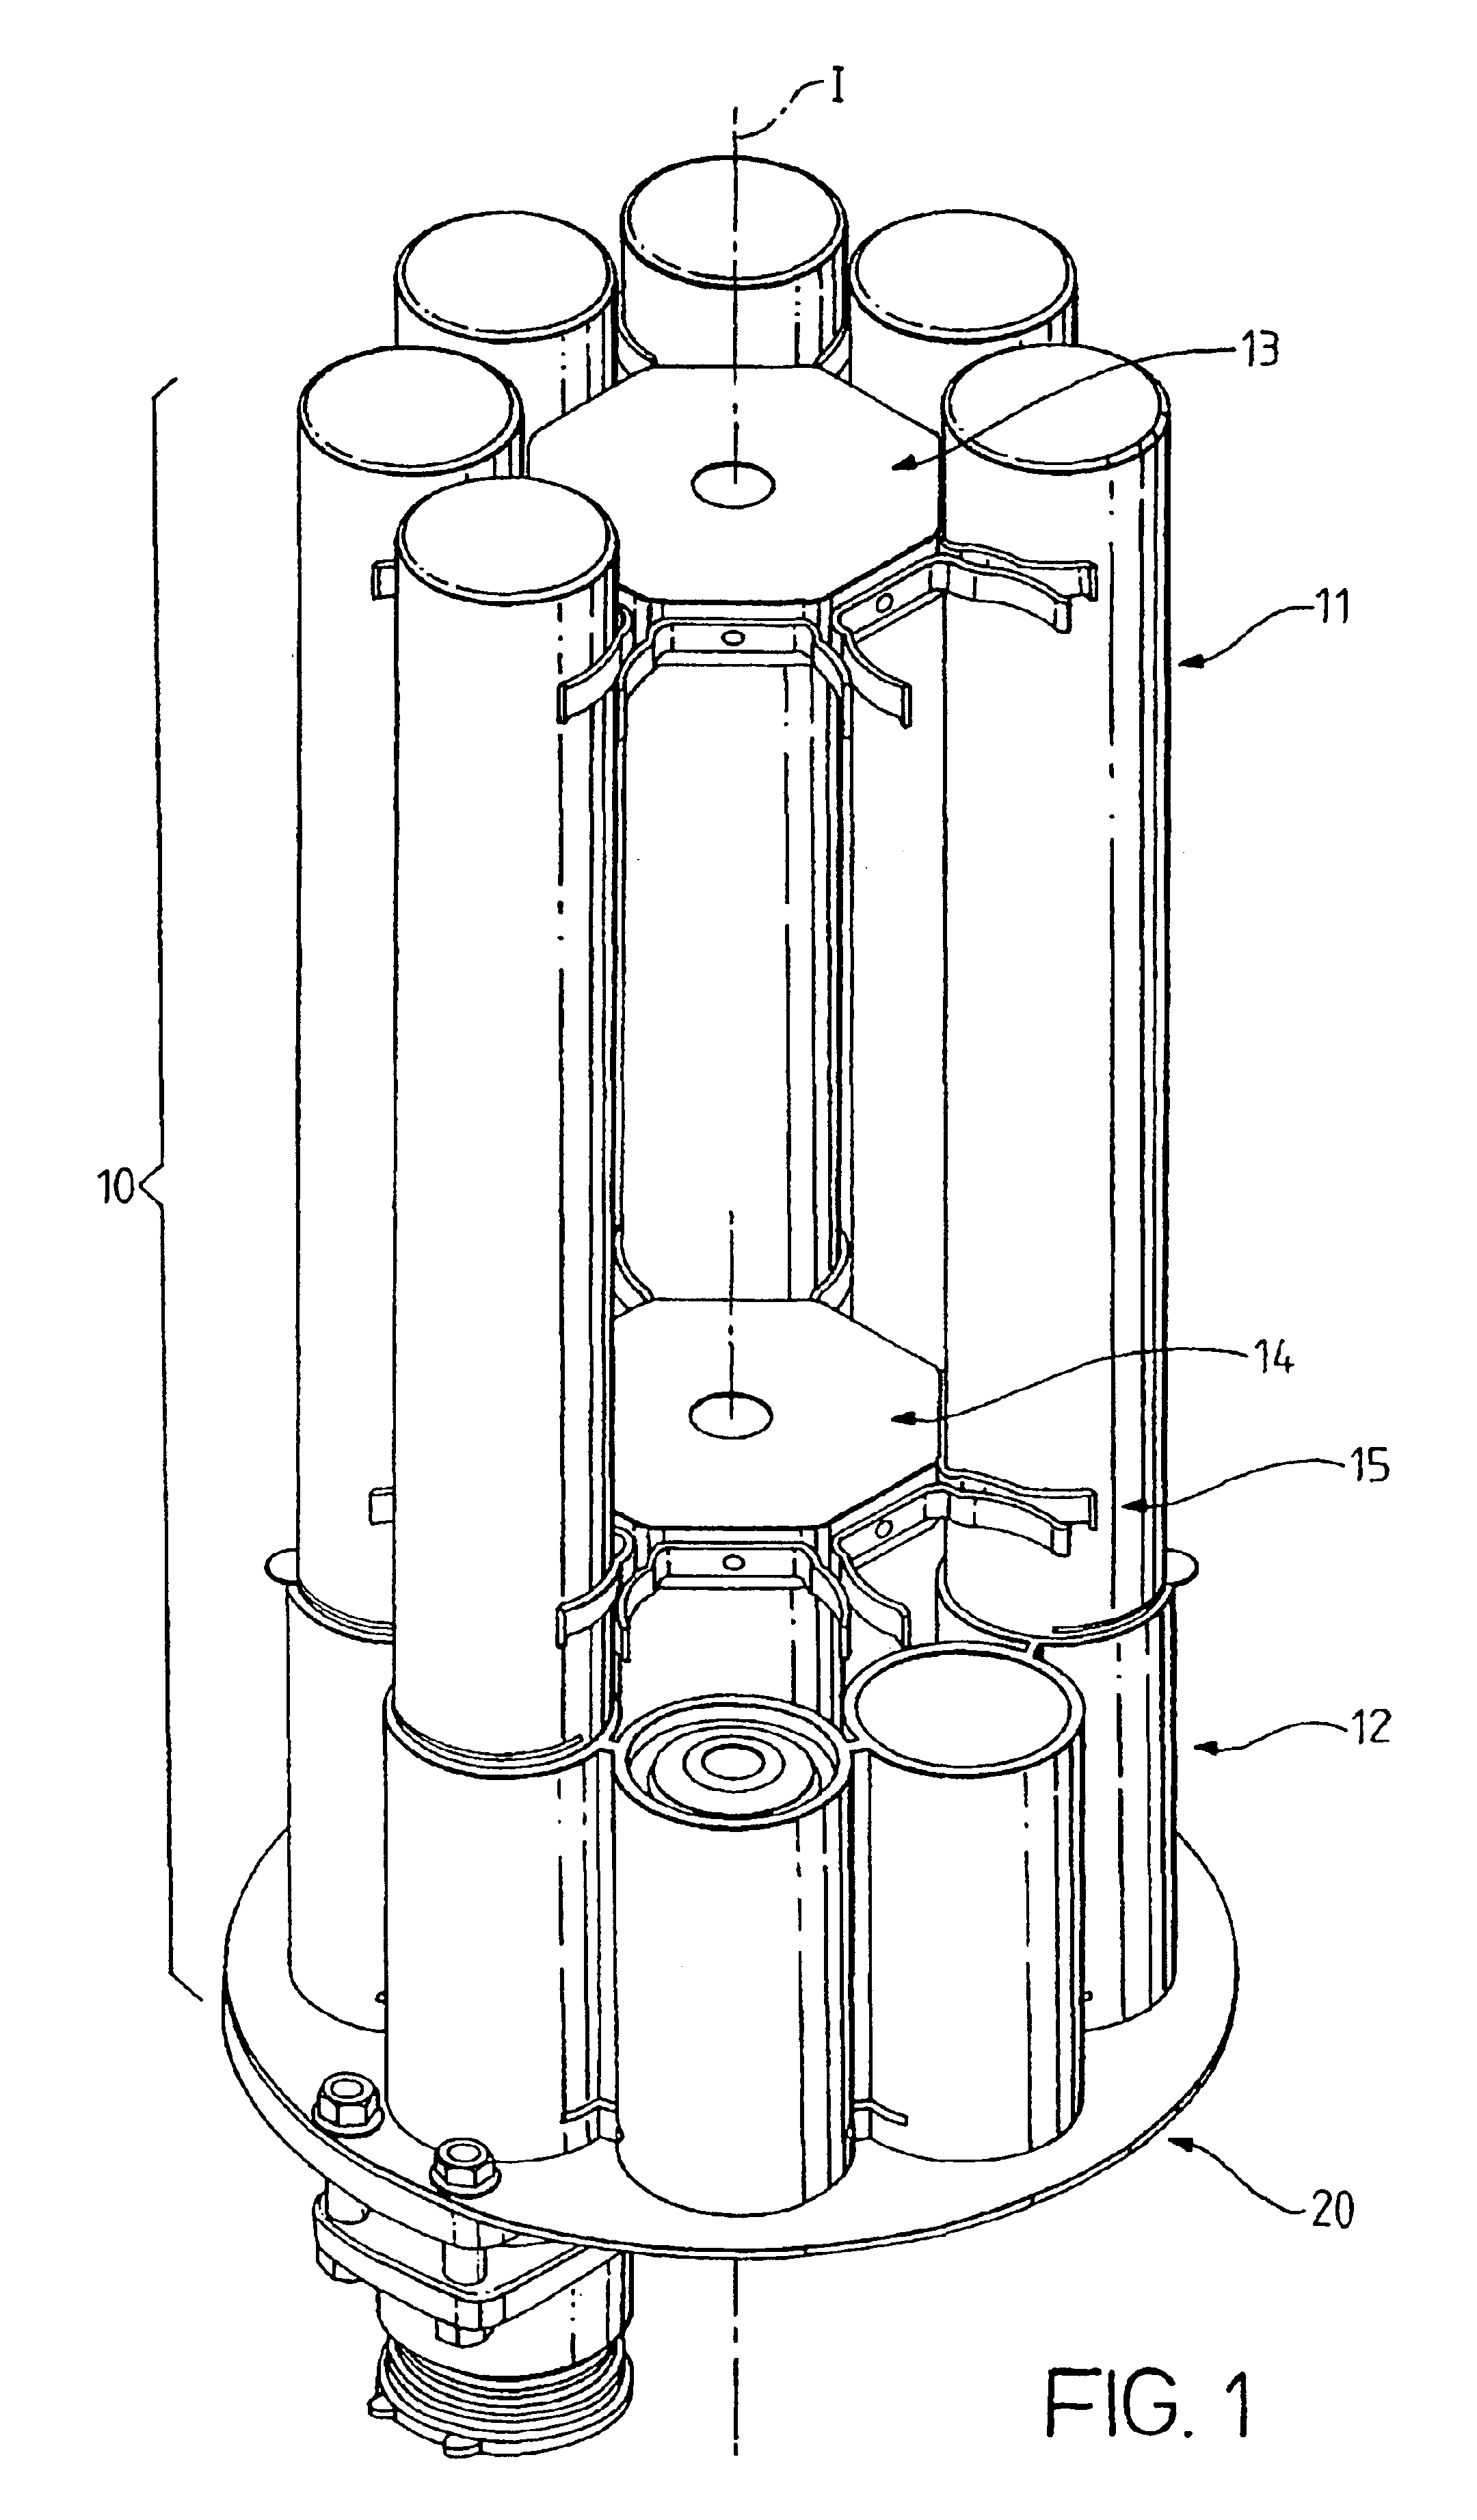 Extraction device with built-in capsule loading system